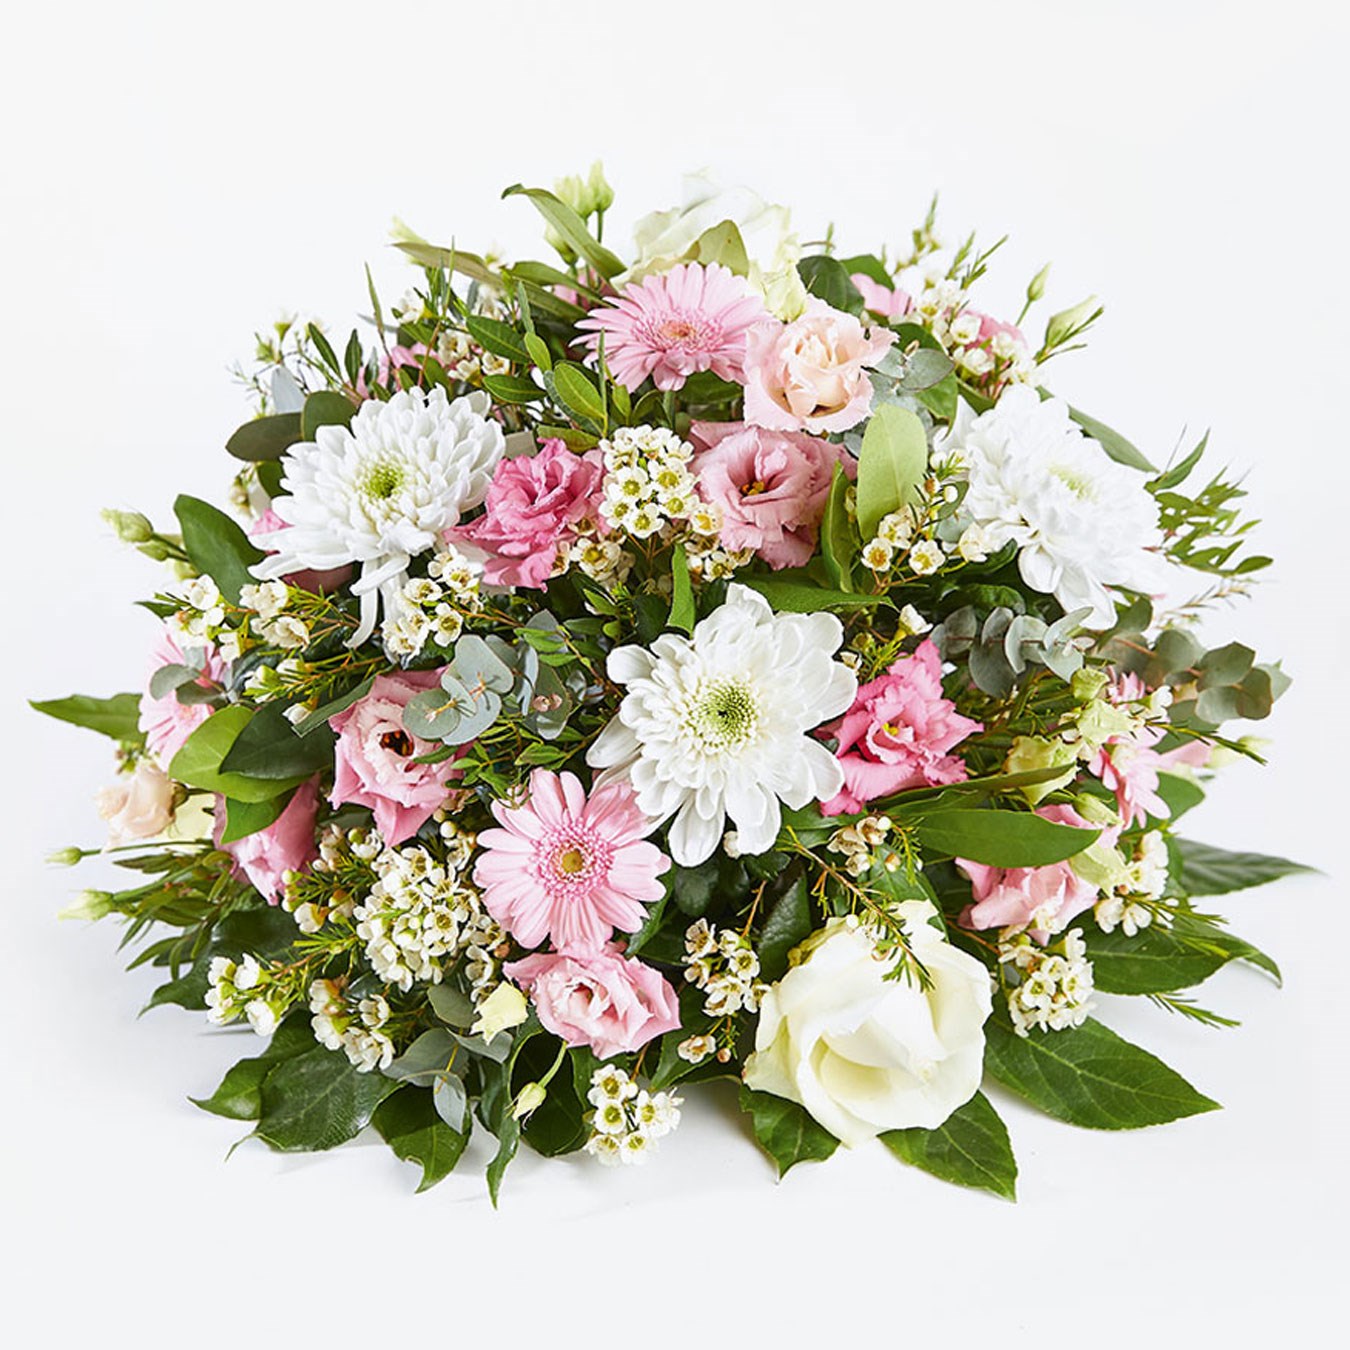 product image for Sympathy or funeral bouquet